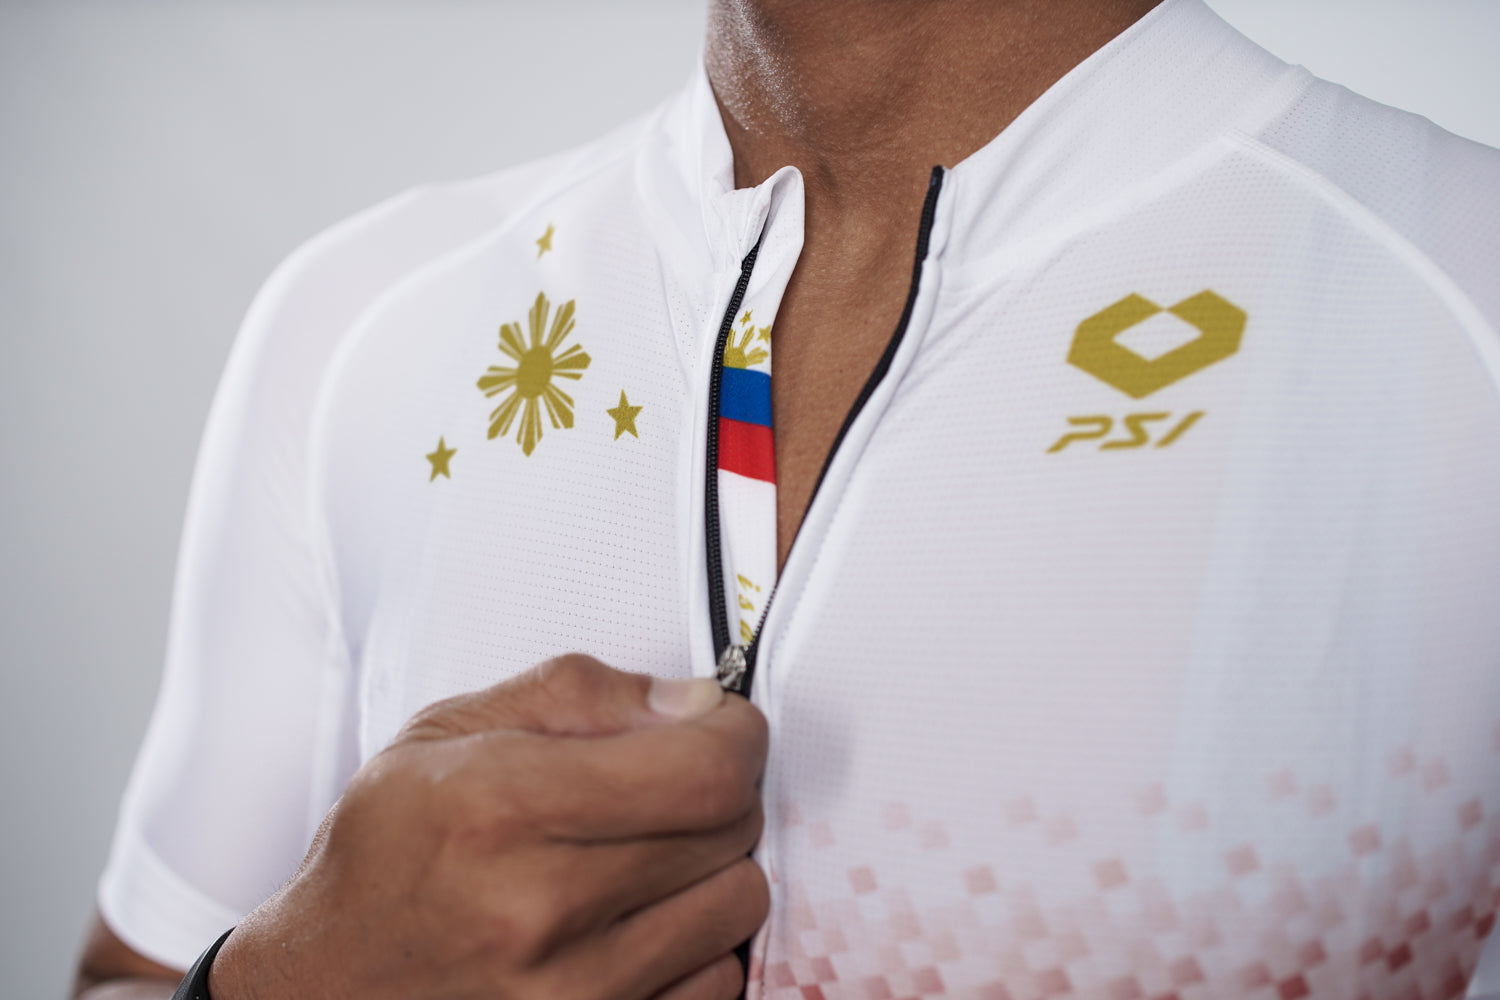 Philippine Flag Cycle Jersey